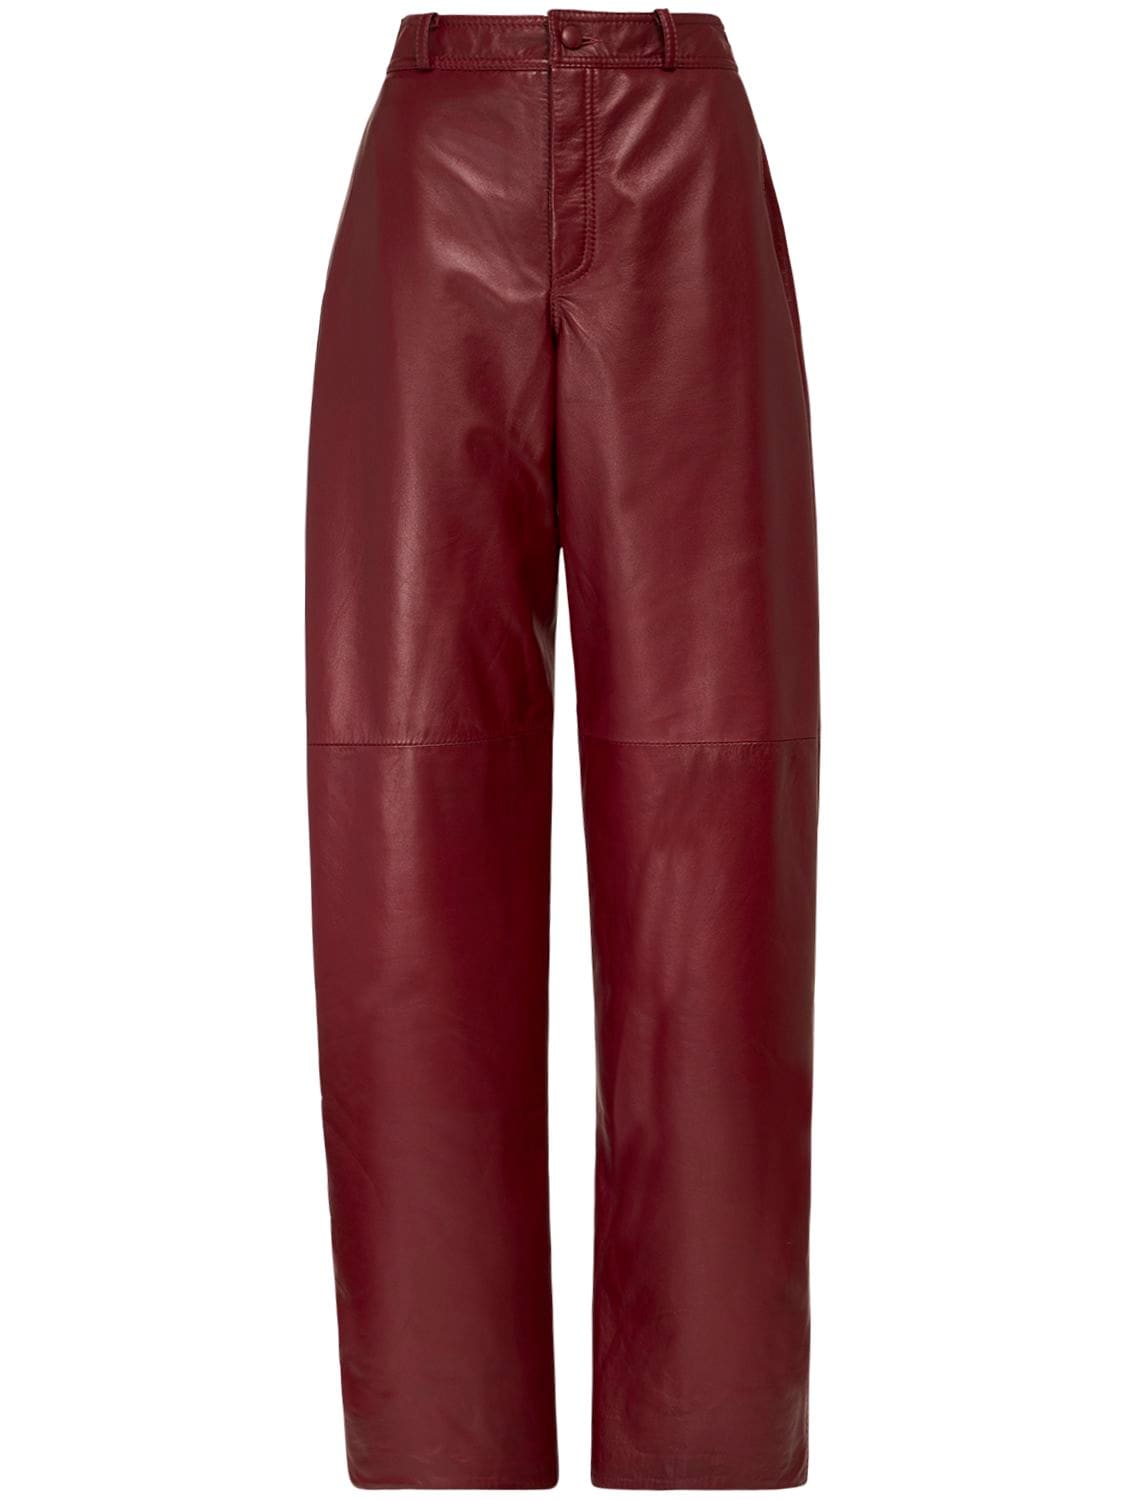 Nynne Briony High Waist Leather Pants In Bordeaux